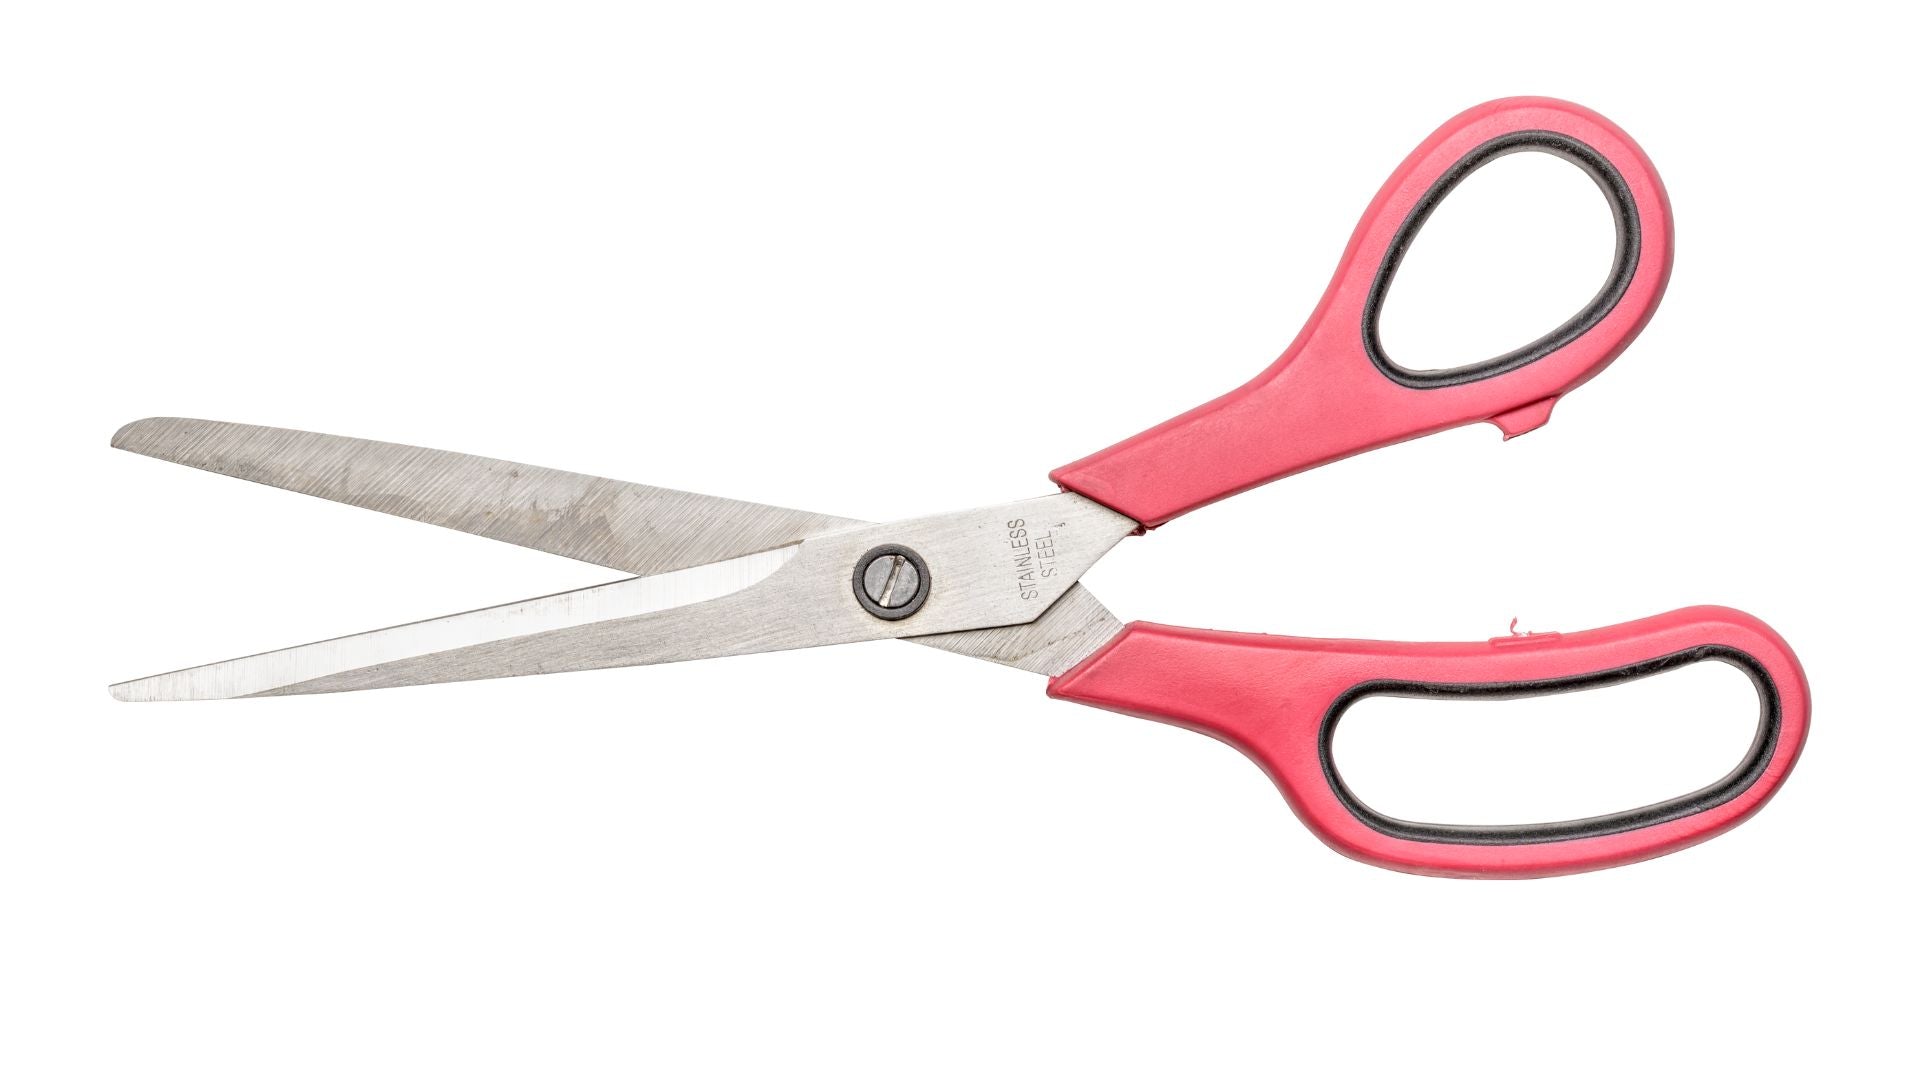 Are Hair Scissors Different Than Other Types of Scissors?